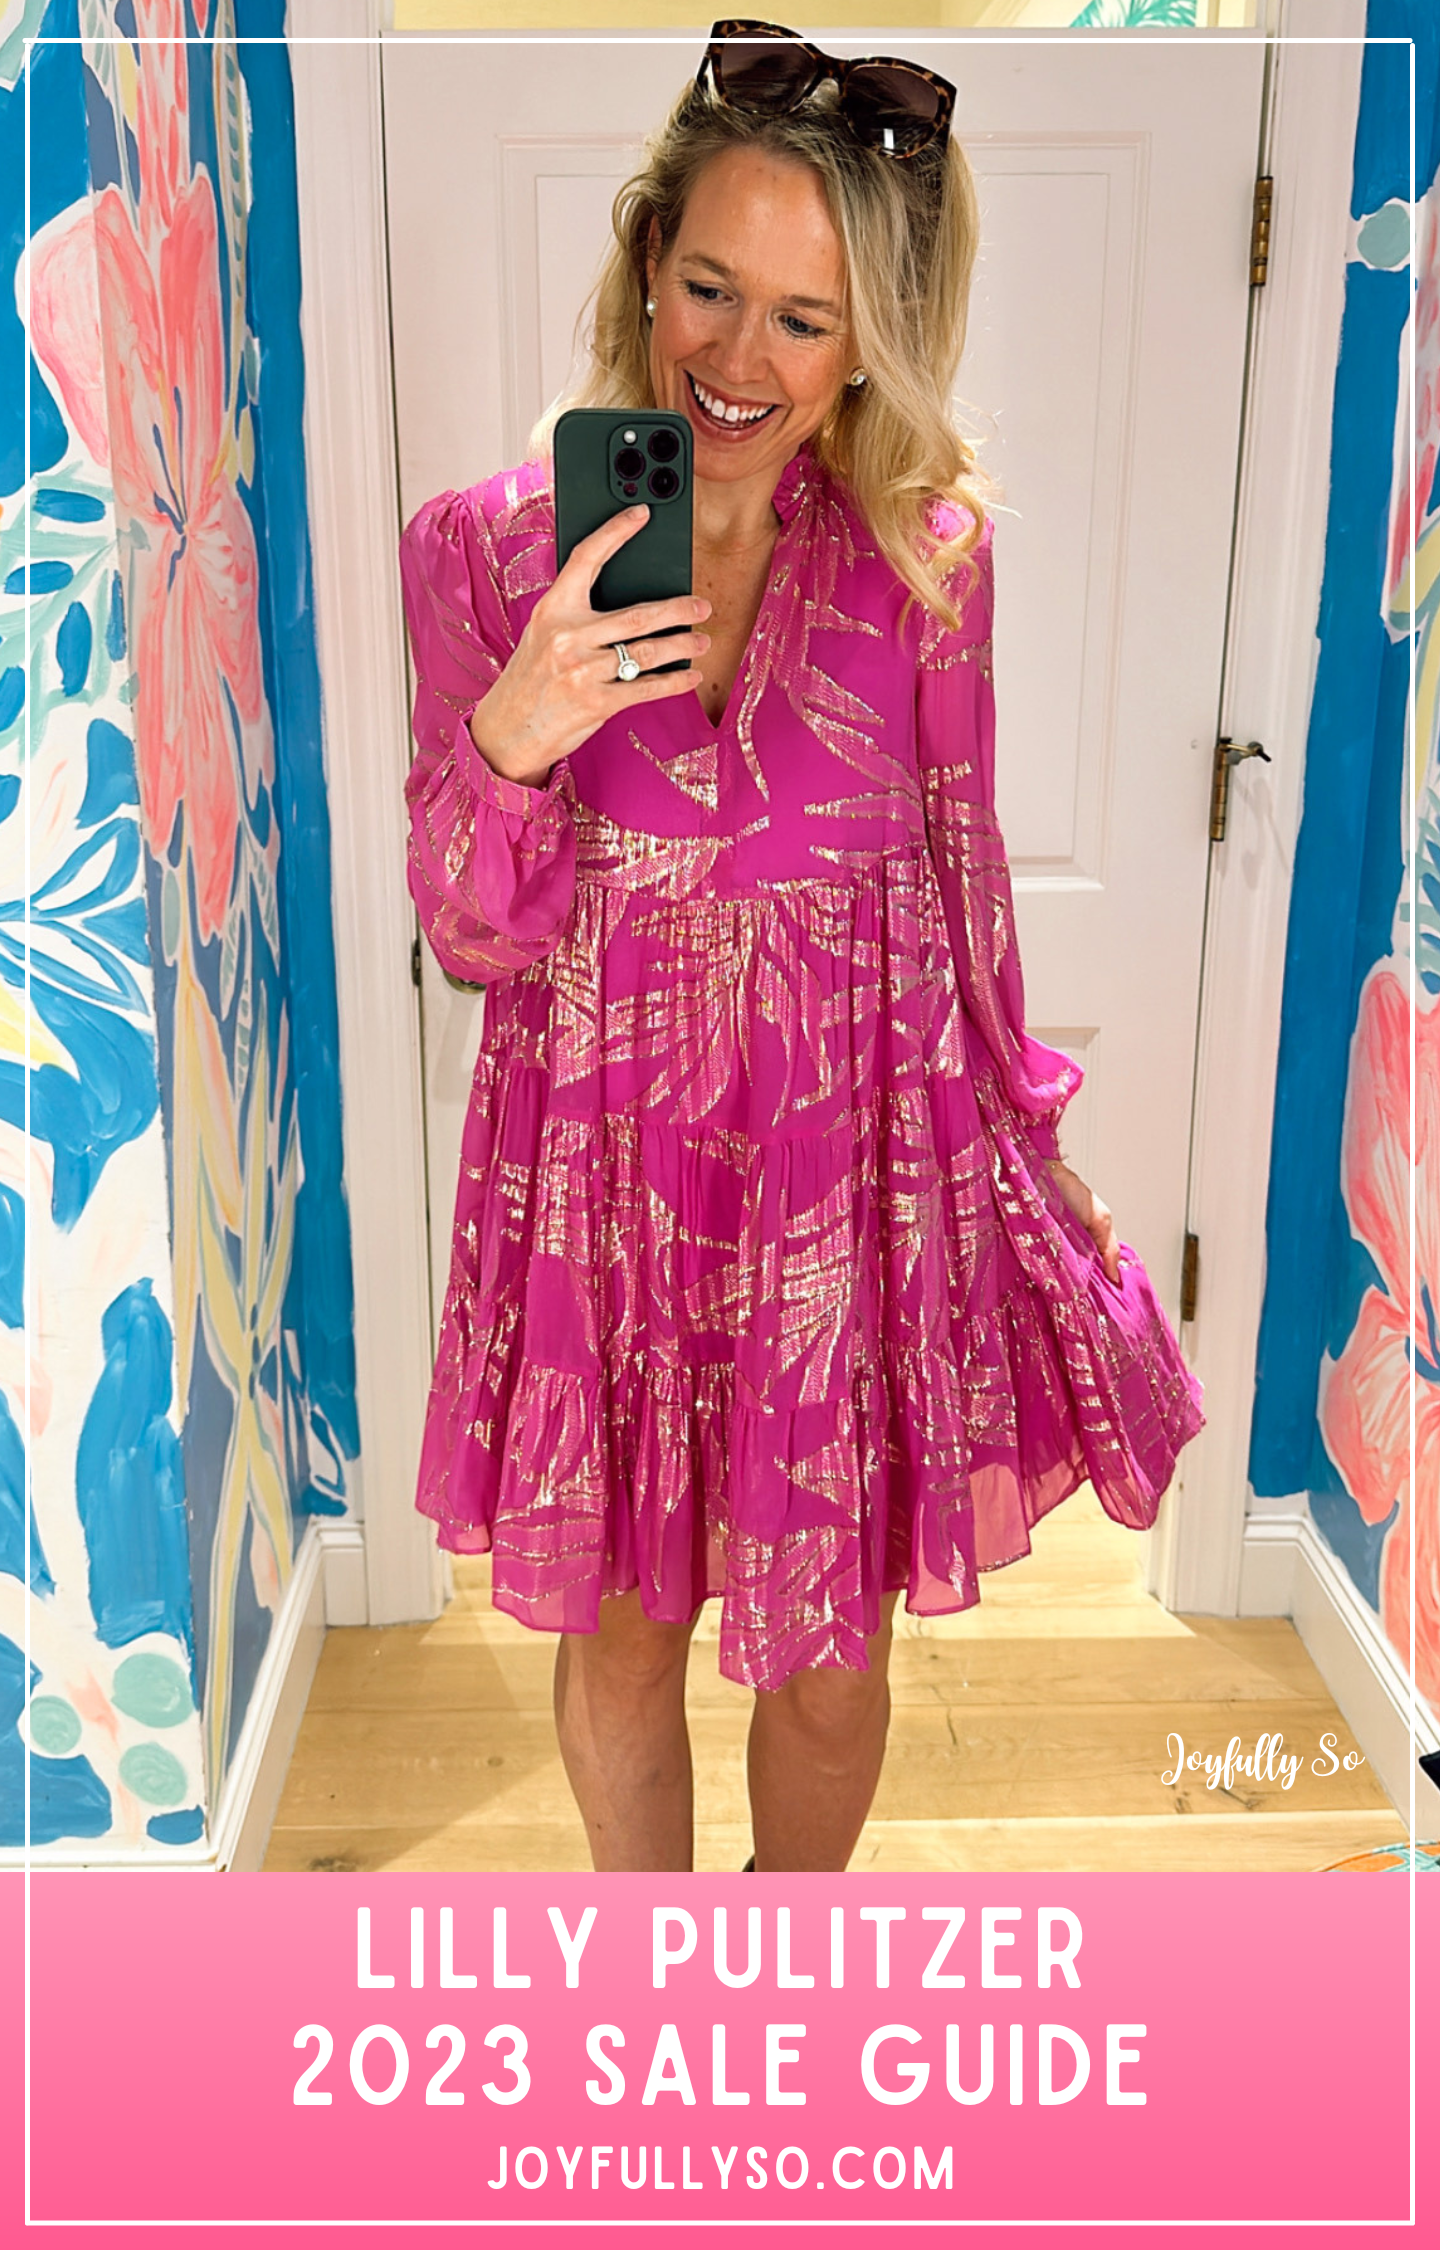 Winter 2023 Lilly Pulitzer Sale Guide - 3